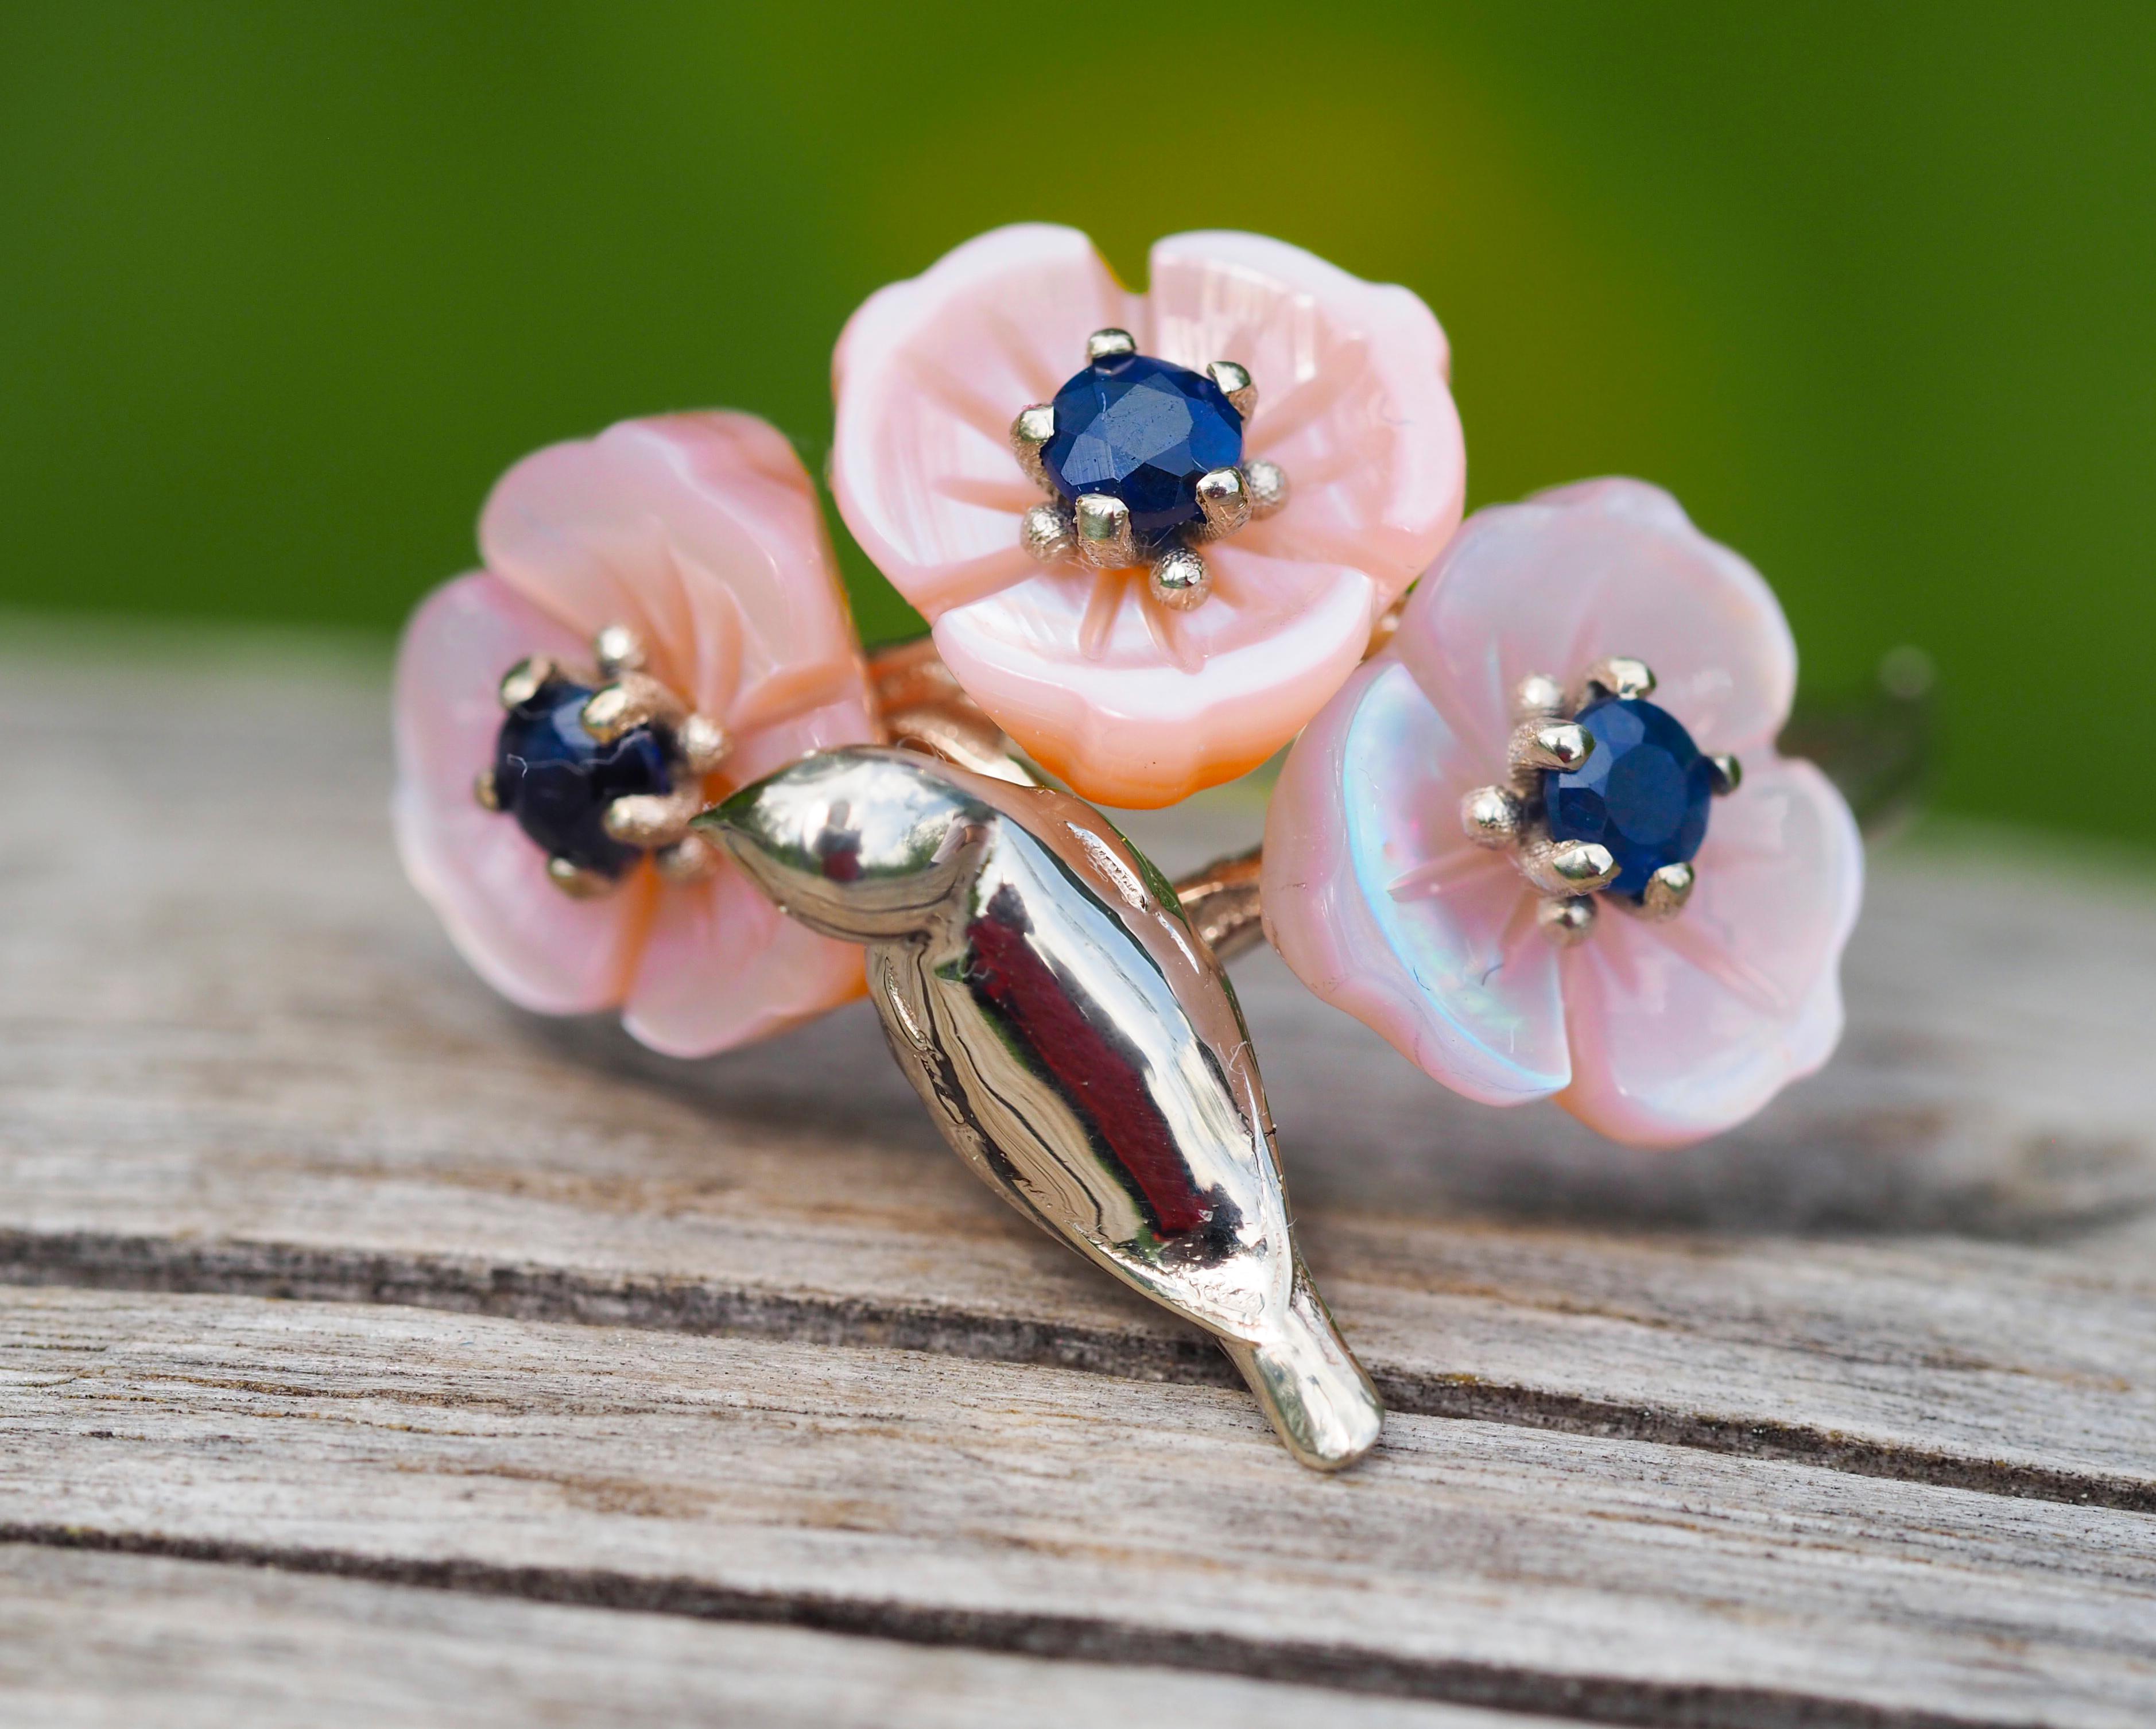 14k Gold Bird on Branch Ring with Sapphires and Carved Mother of Pearl Flowers 1